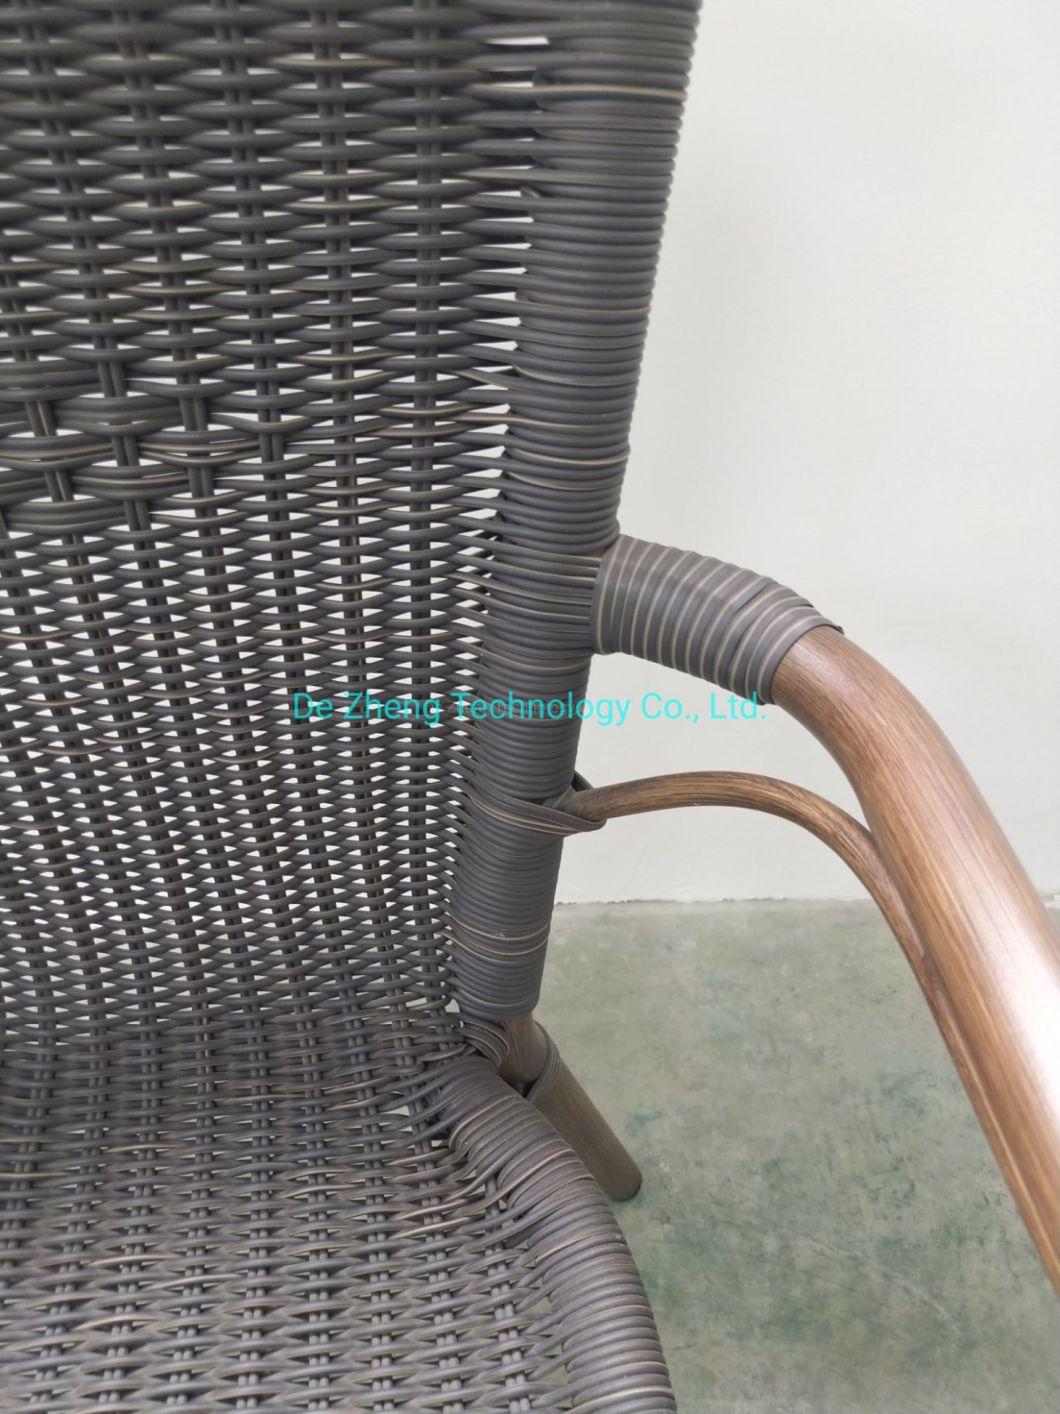 European Style UV Resistant High Back Outdoor PE Rattan Chair for Restaurant Hotel